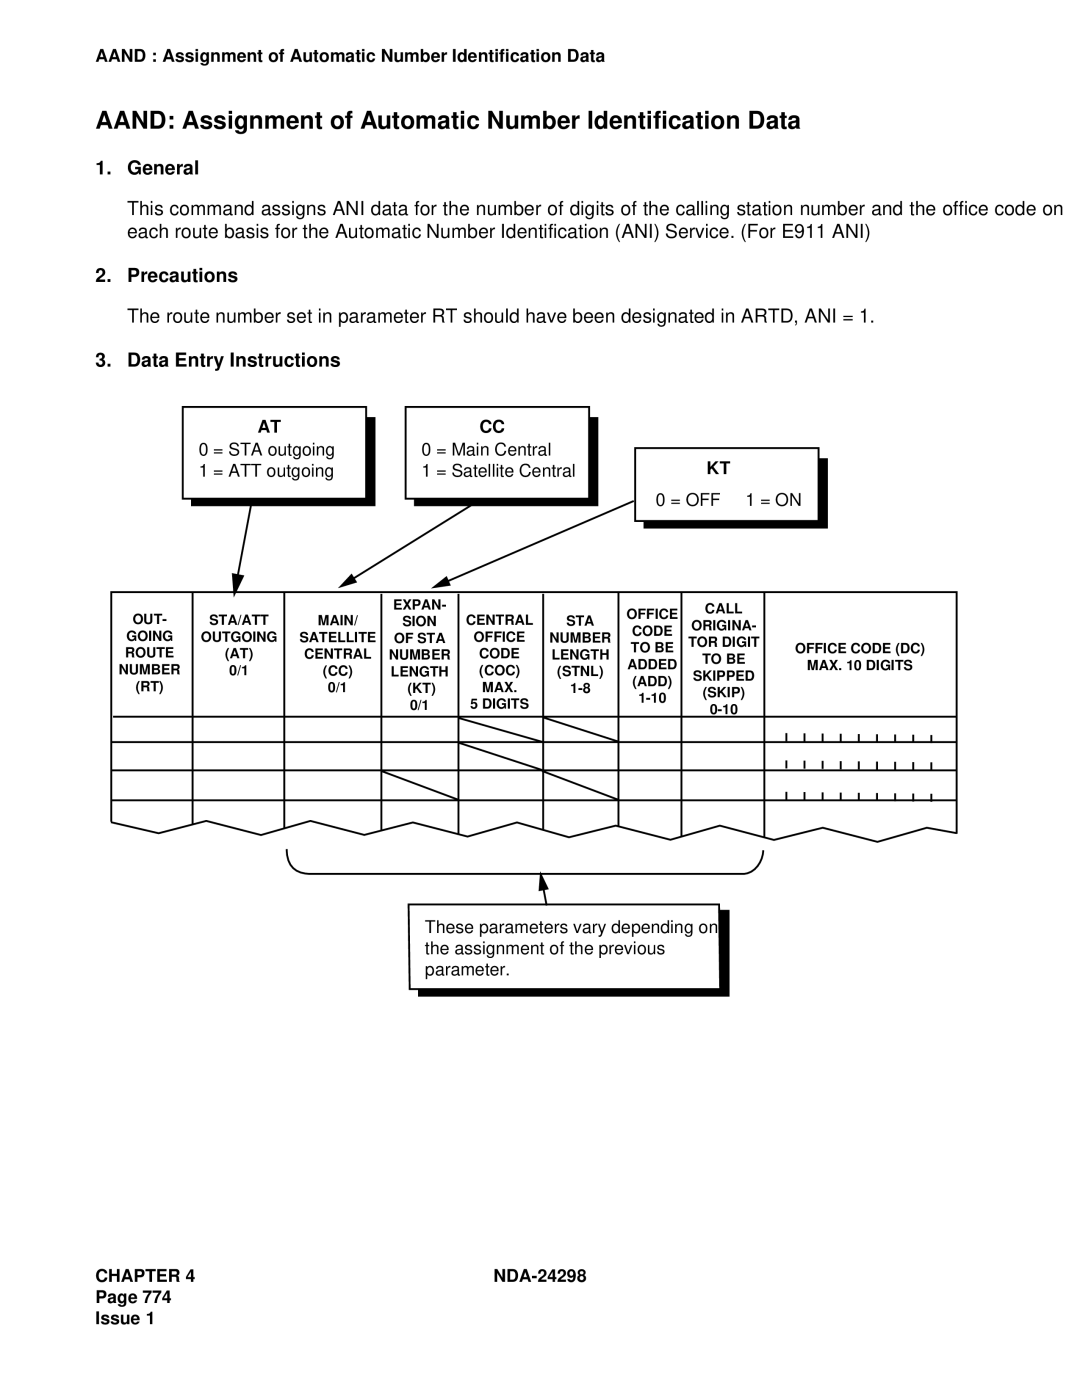 NEC NDA-24298 manual Aand Assignment of Automatic Number Identification Data 